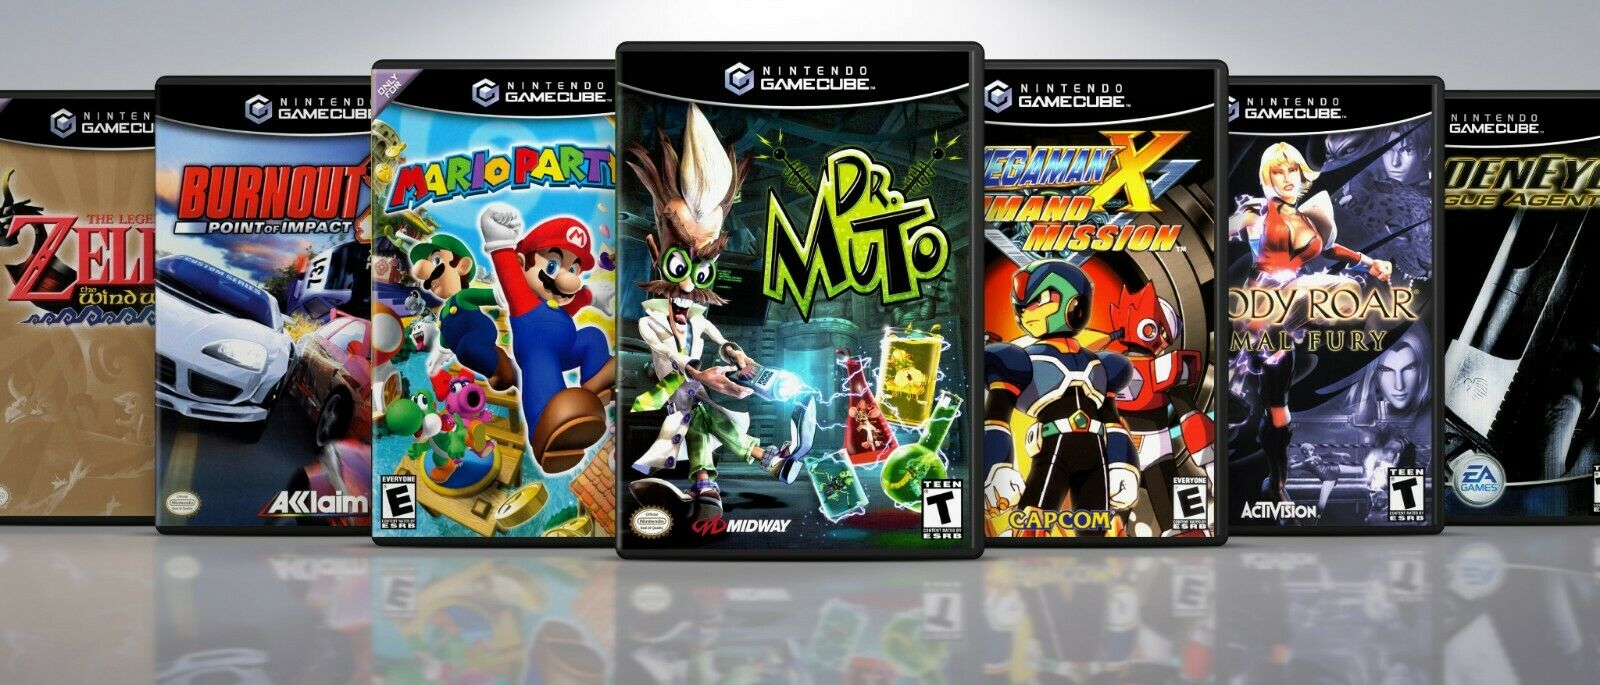 Custom Nintendo GameCube Covers and EU Style Cases: Titles #-N .  !! NO GAMES !!